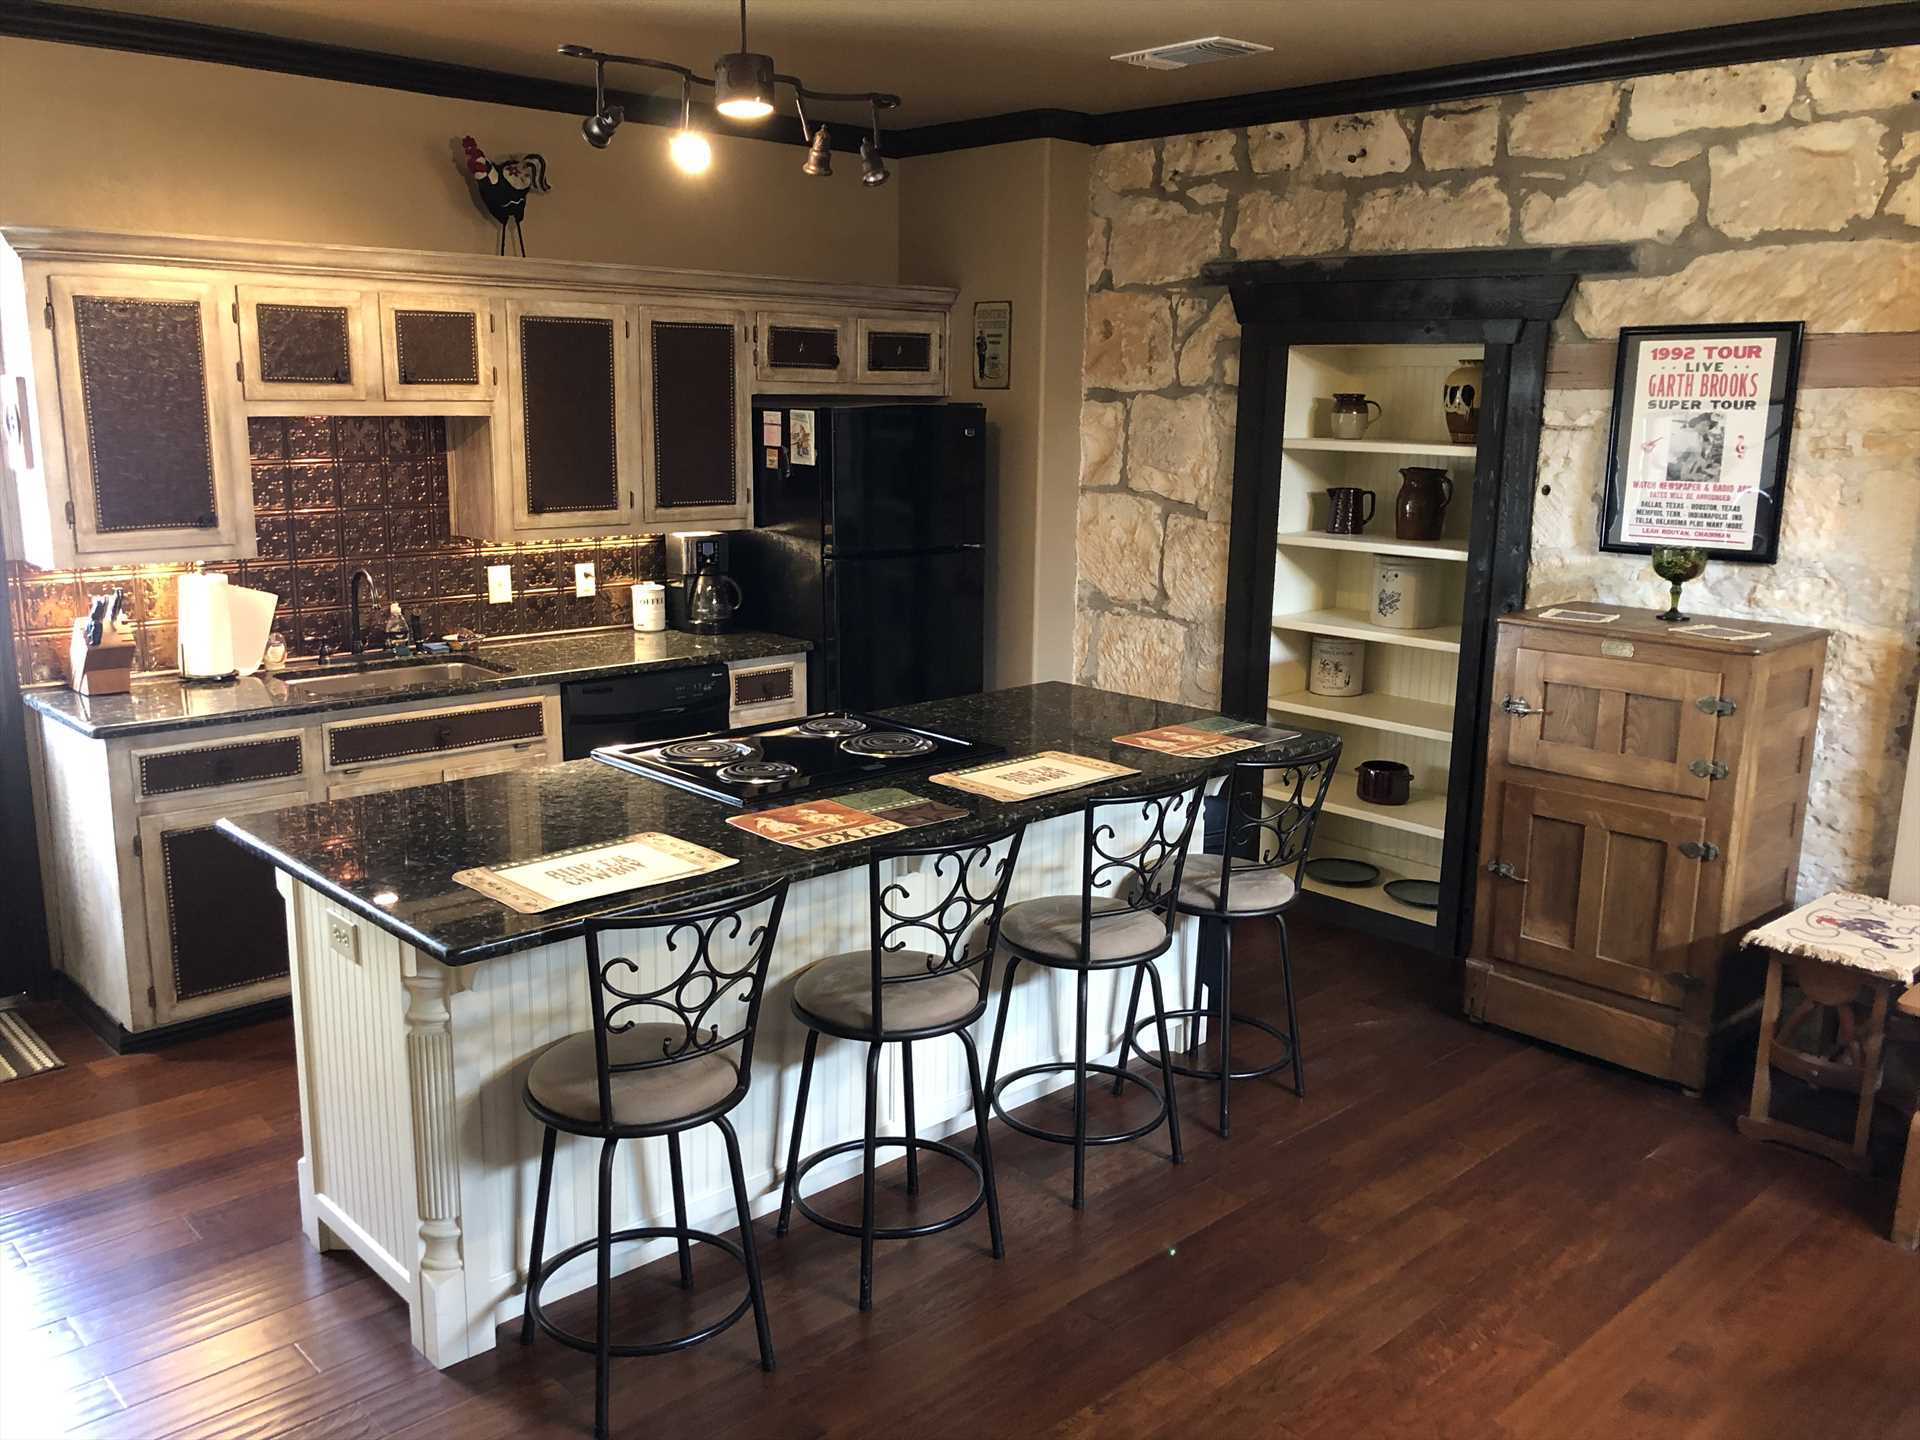                                                 The full kitchen features not only modern appliances, but all the cooking ware, utensils, glasses, and serving ware you'll need. There's also a sweet-looking bar area with seating for four!